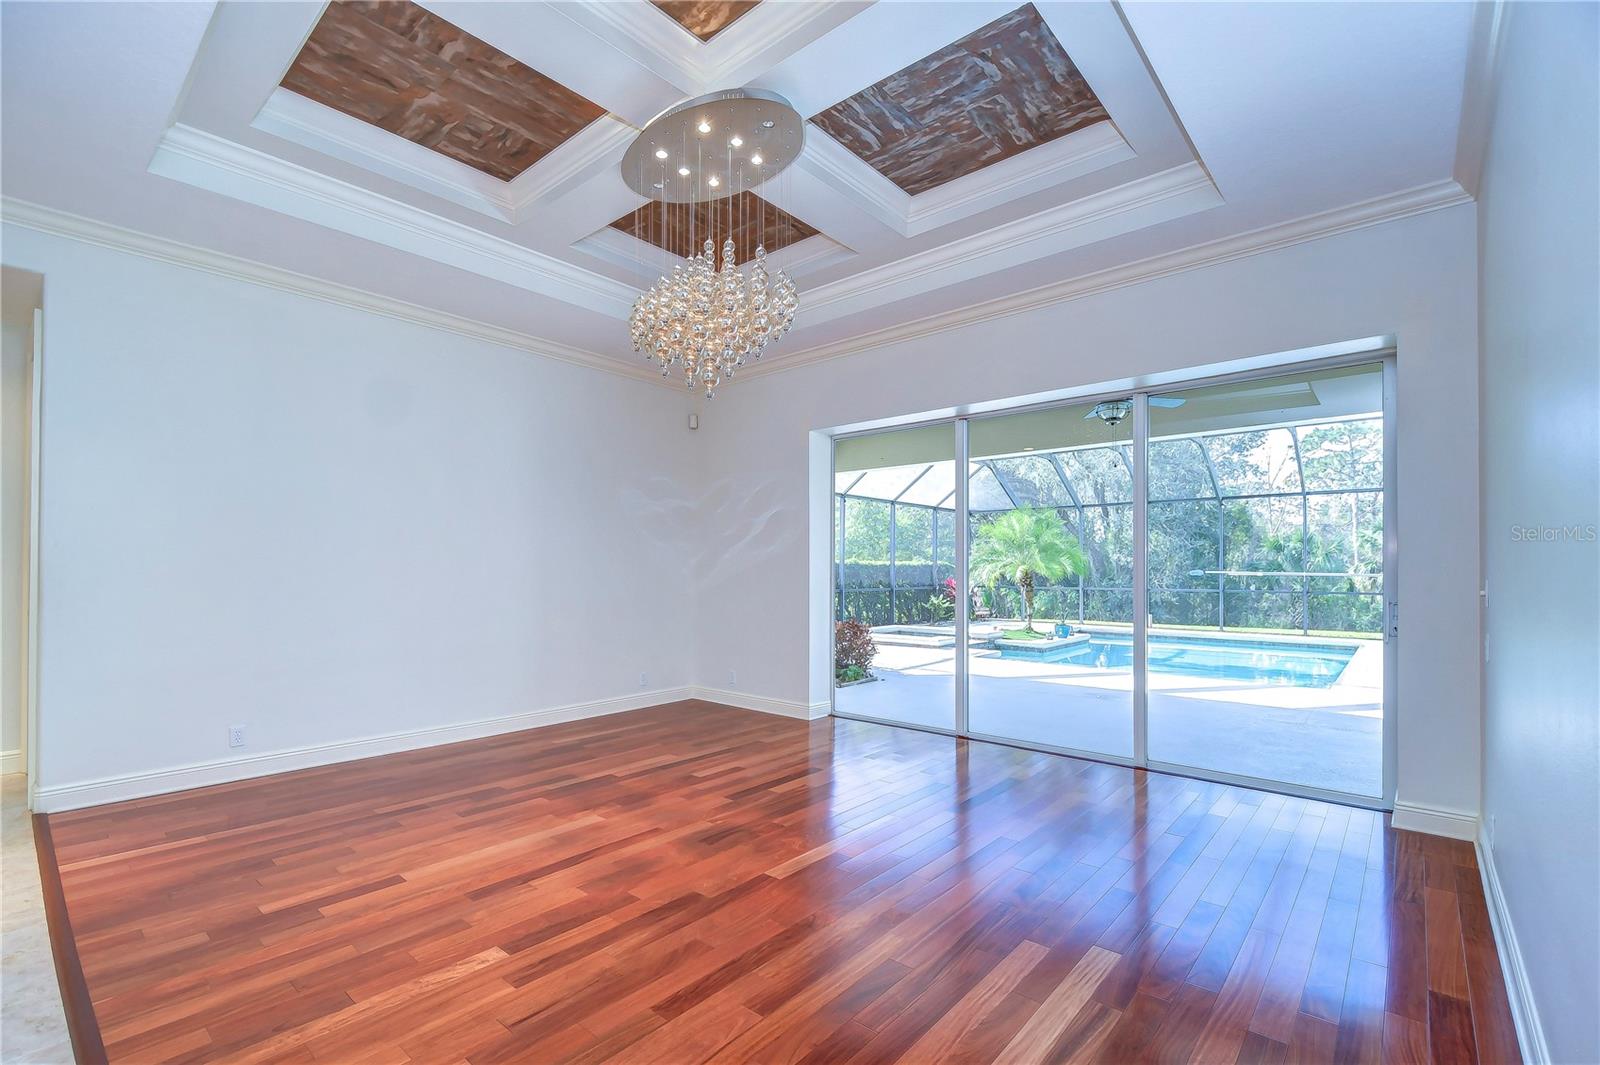 The rich Brazilian cherry floors extend throughout the home!